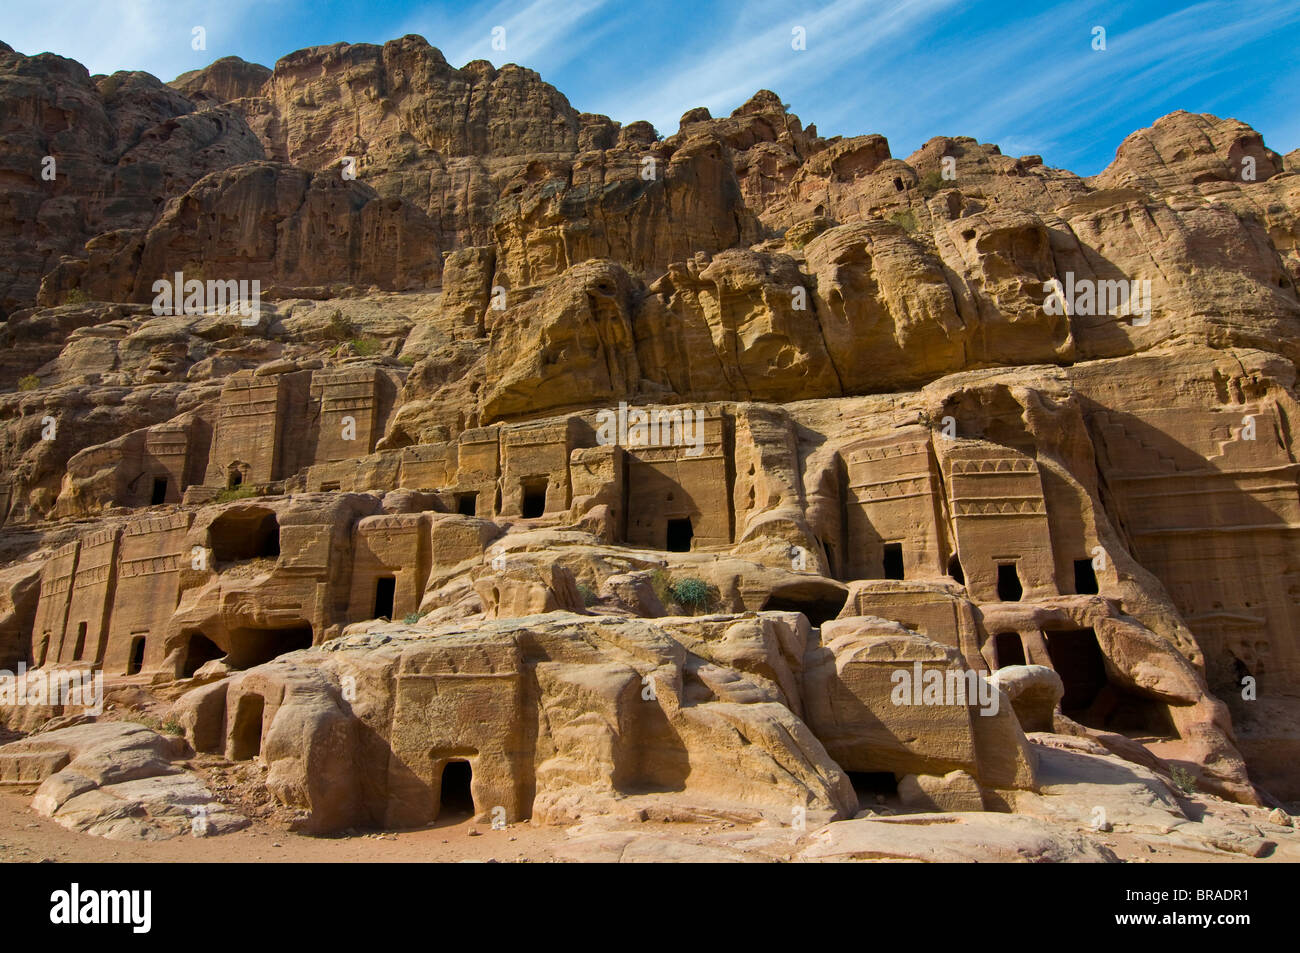 The old tombs of the Nabatean city, Petra, UNESCO World Heritage Site, Jordan, Middle East Stock Photo